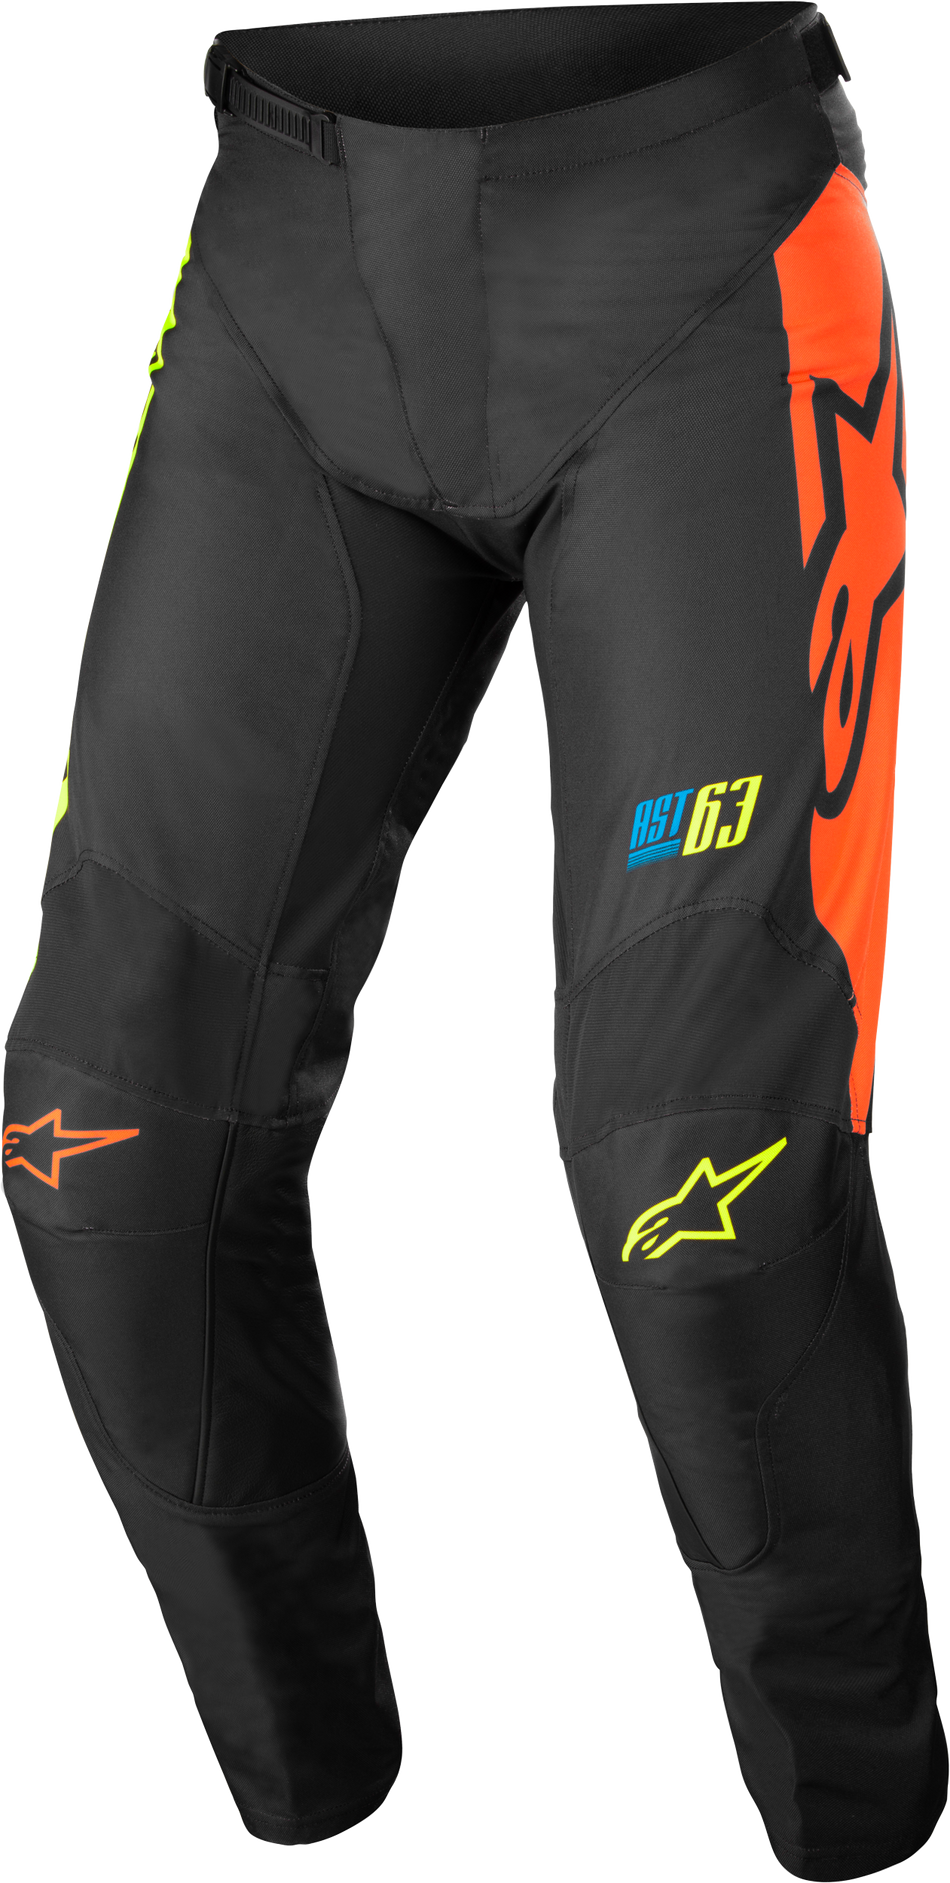 ALPINESTARS Youth Racer Compass Pants Black/Yellow Fluo/Coral Sz 24 3742122-1534-24